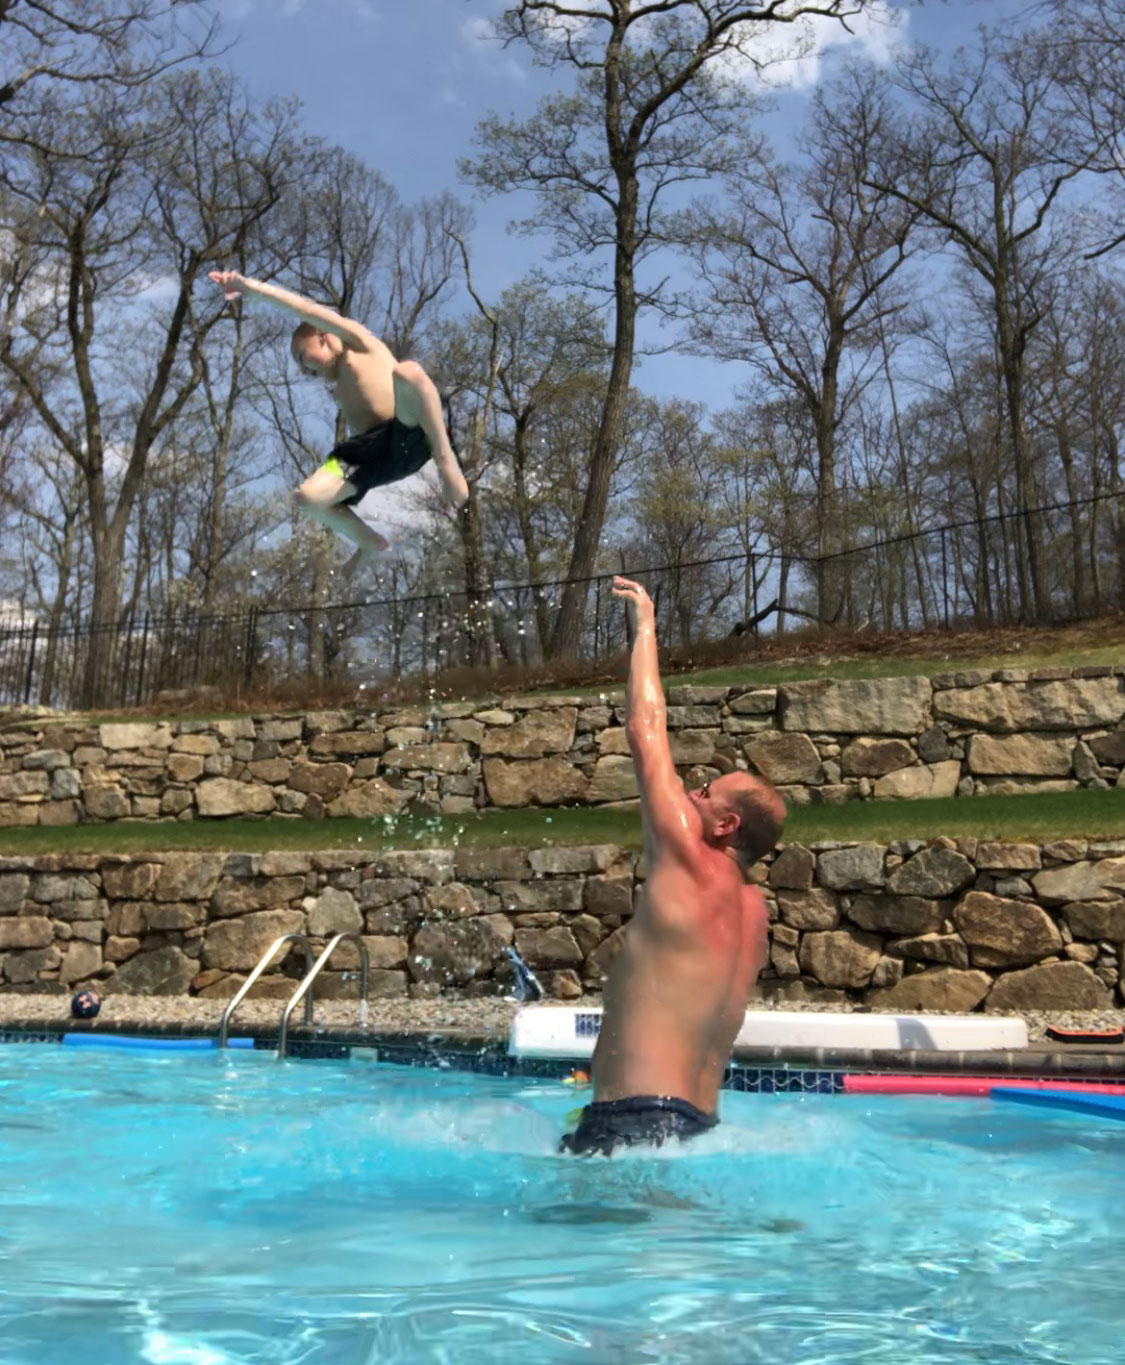 Man throws his son in the pool